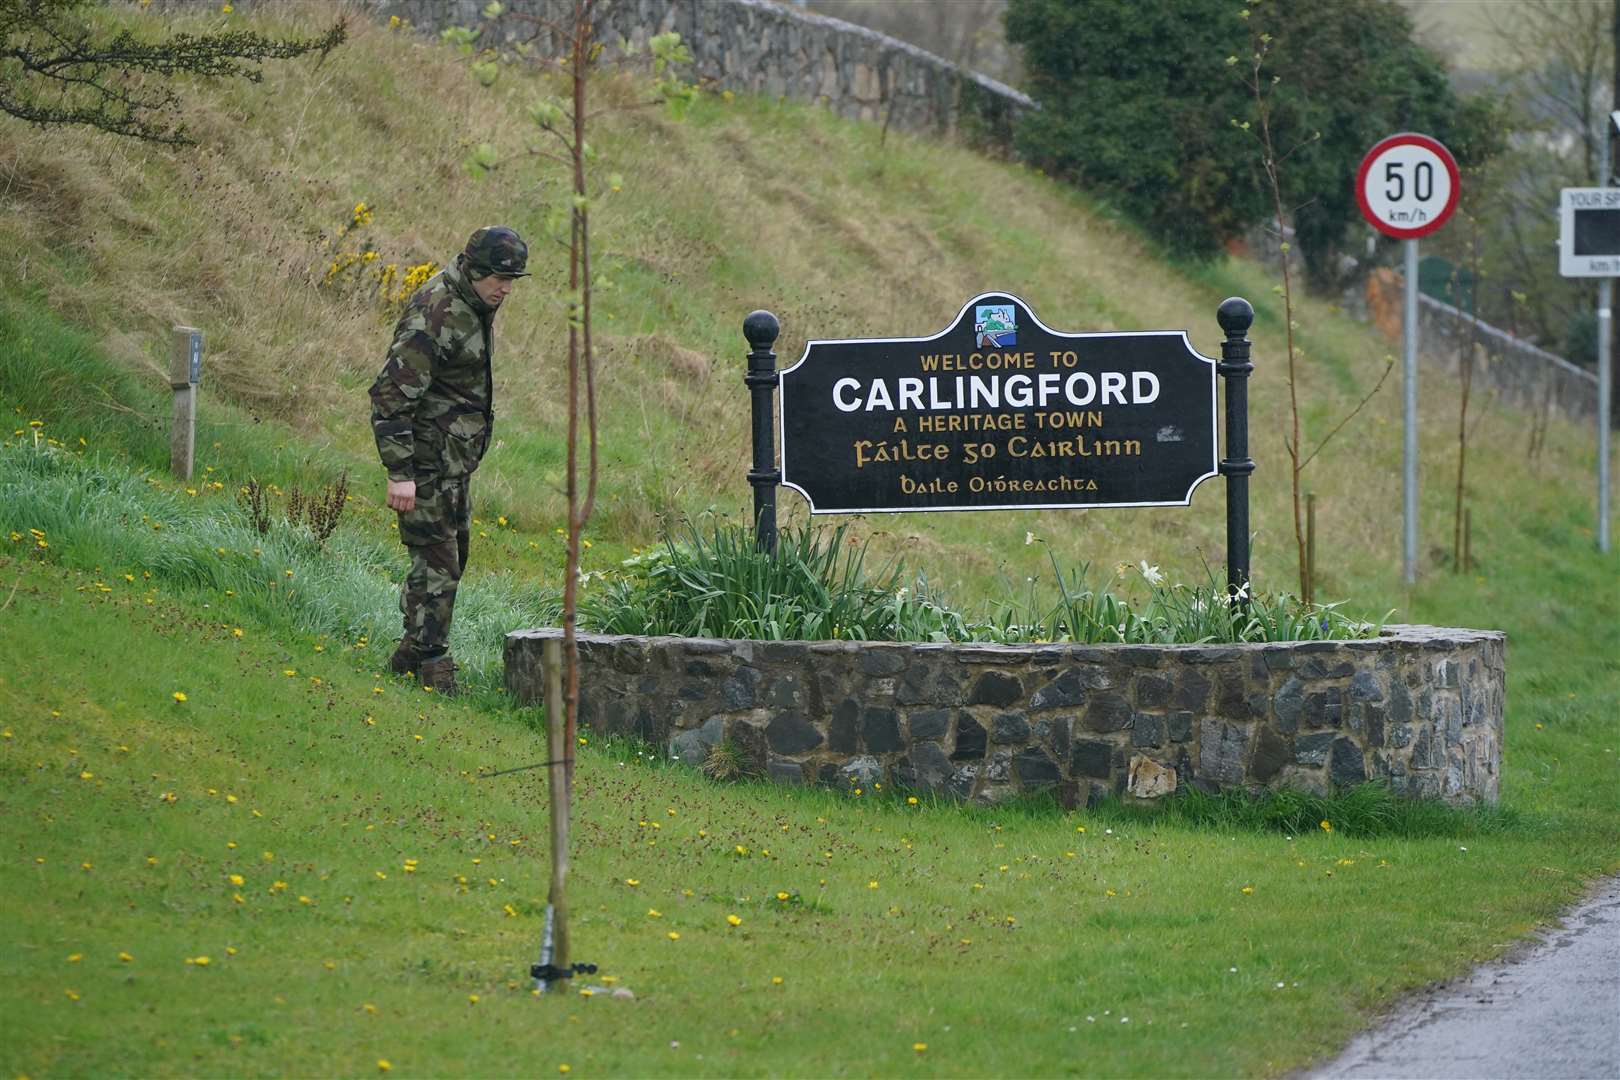 A member of the defence forces carries out searches at the entrance to Carlingford, Co Louth, ahead of a visit from US President Joe Biden (Niall Carson/PA)